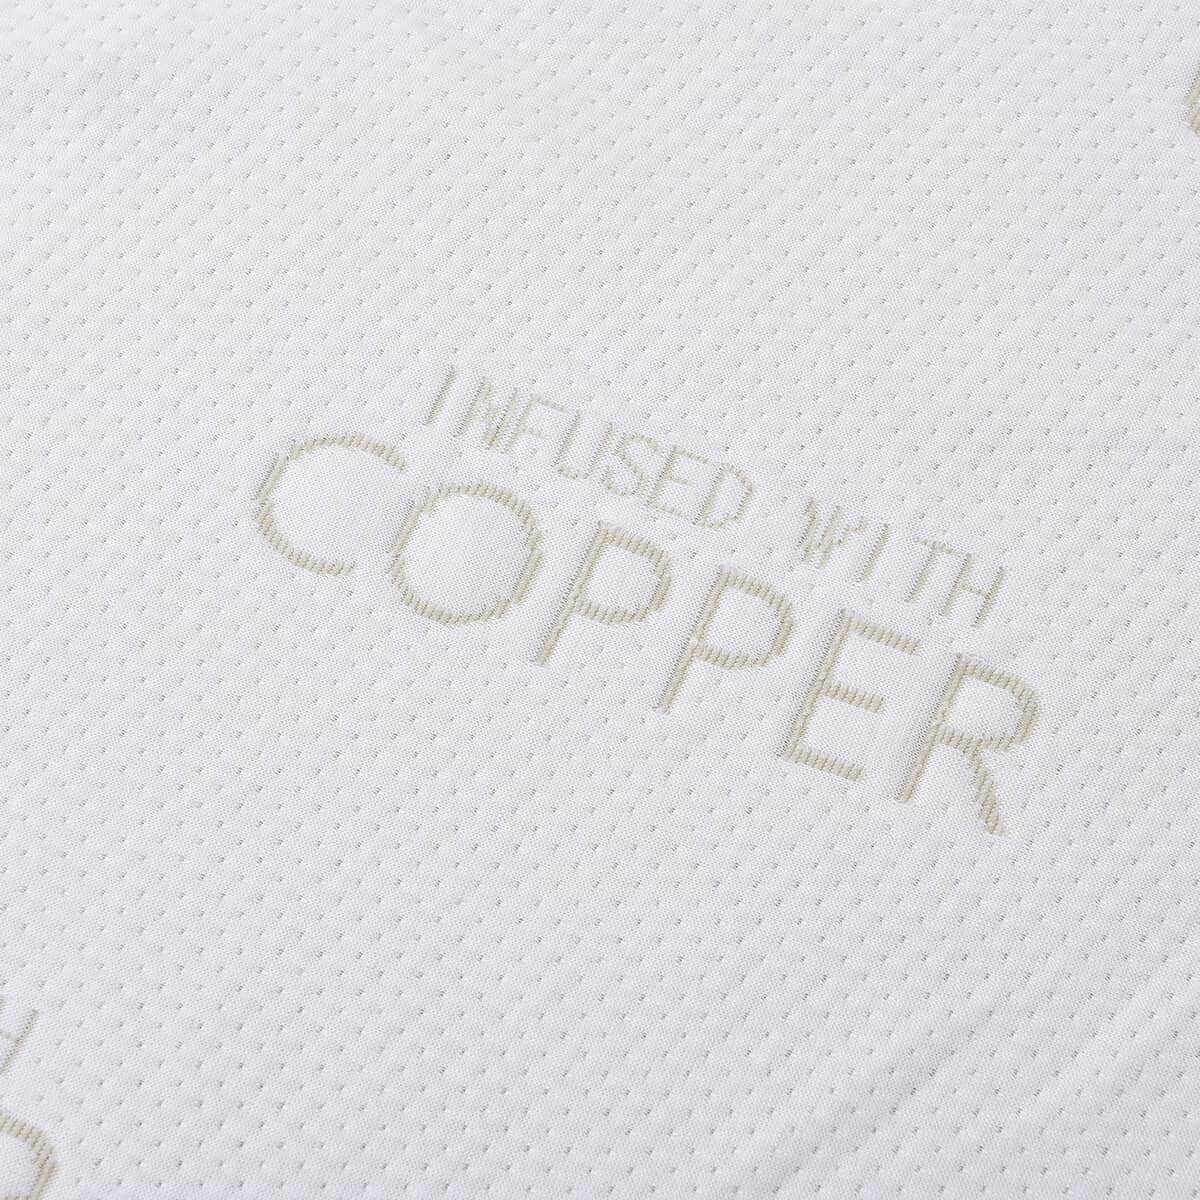 Homesmart Copper Infused Jacquard Mattress Protector Cover Full Size image number 2